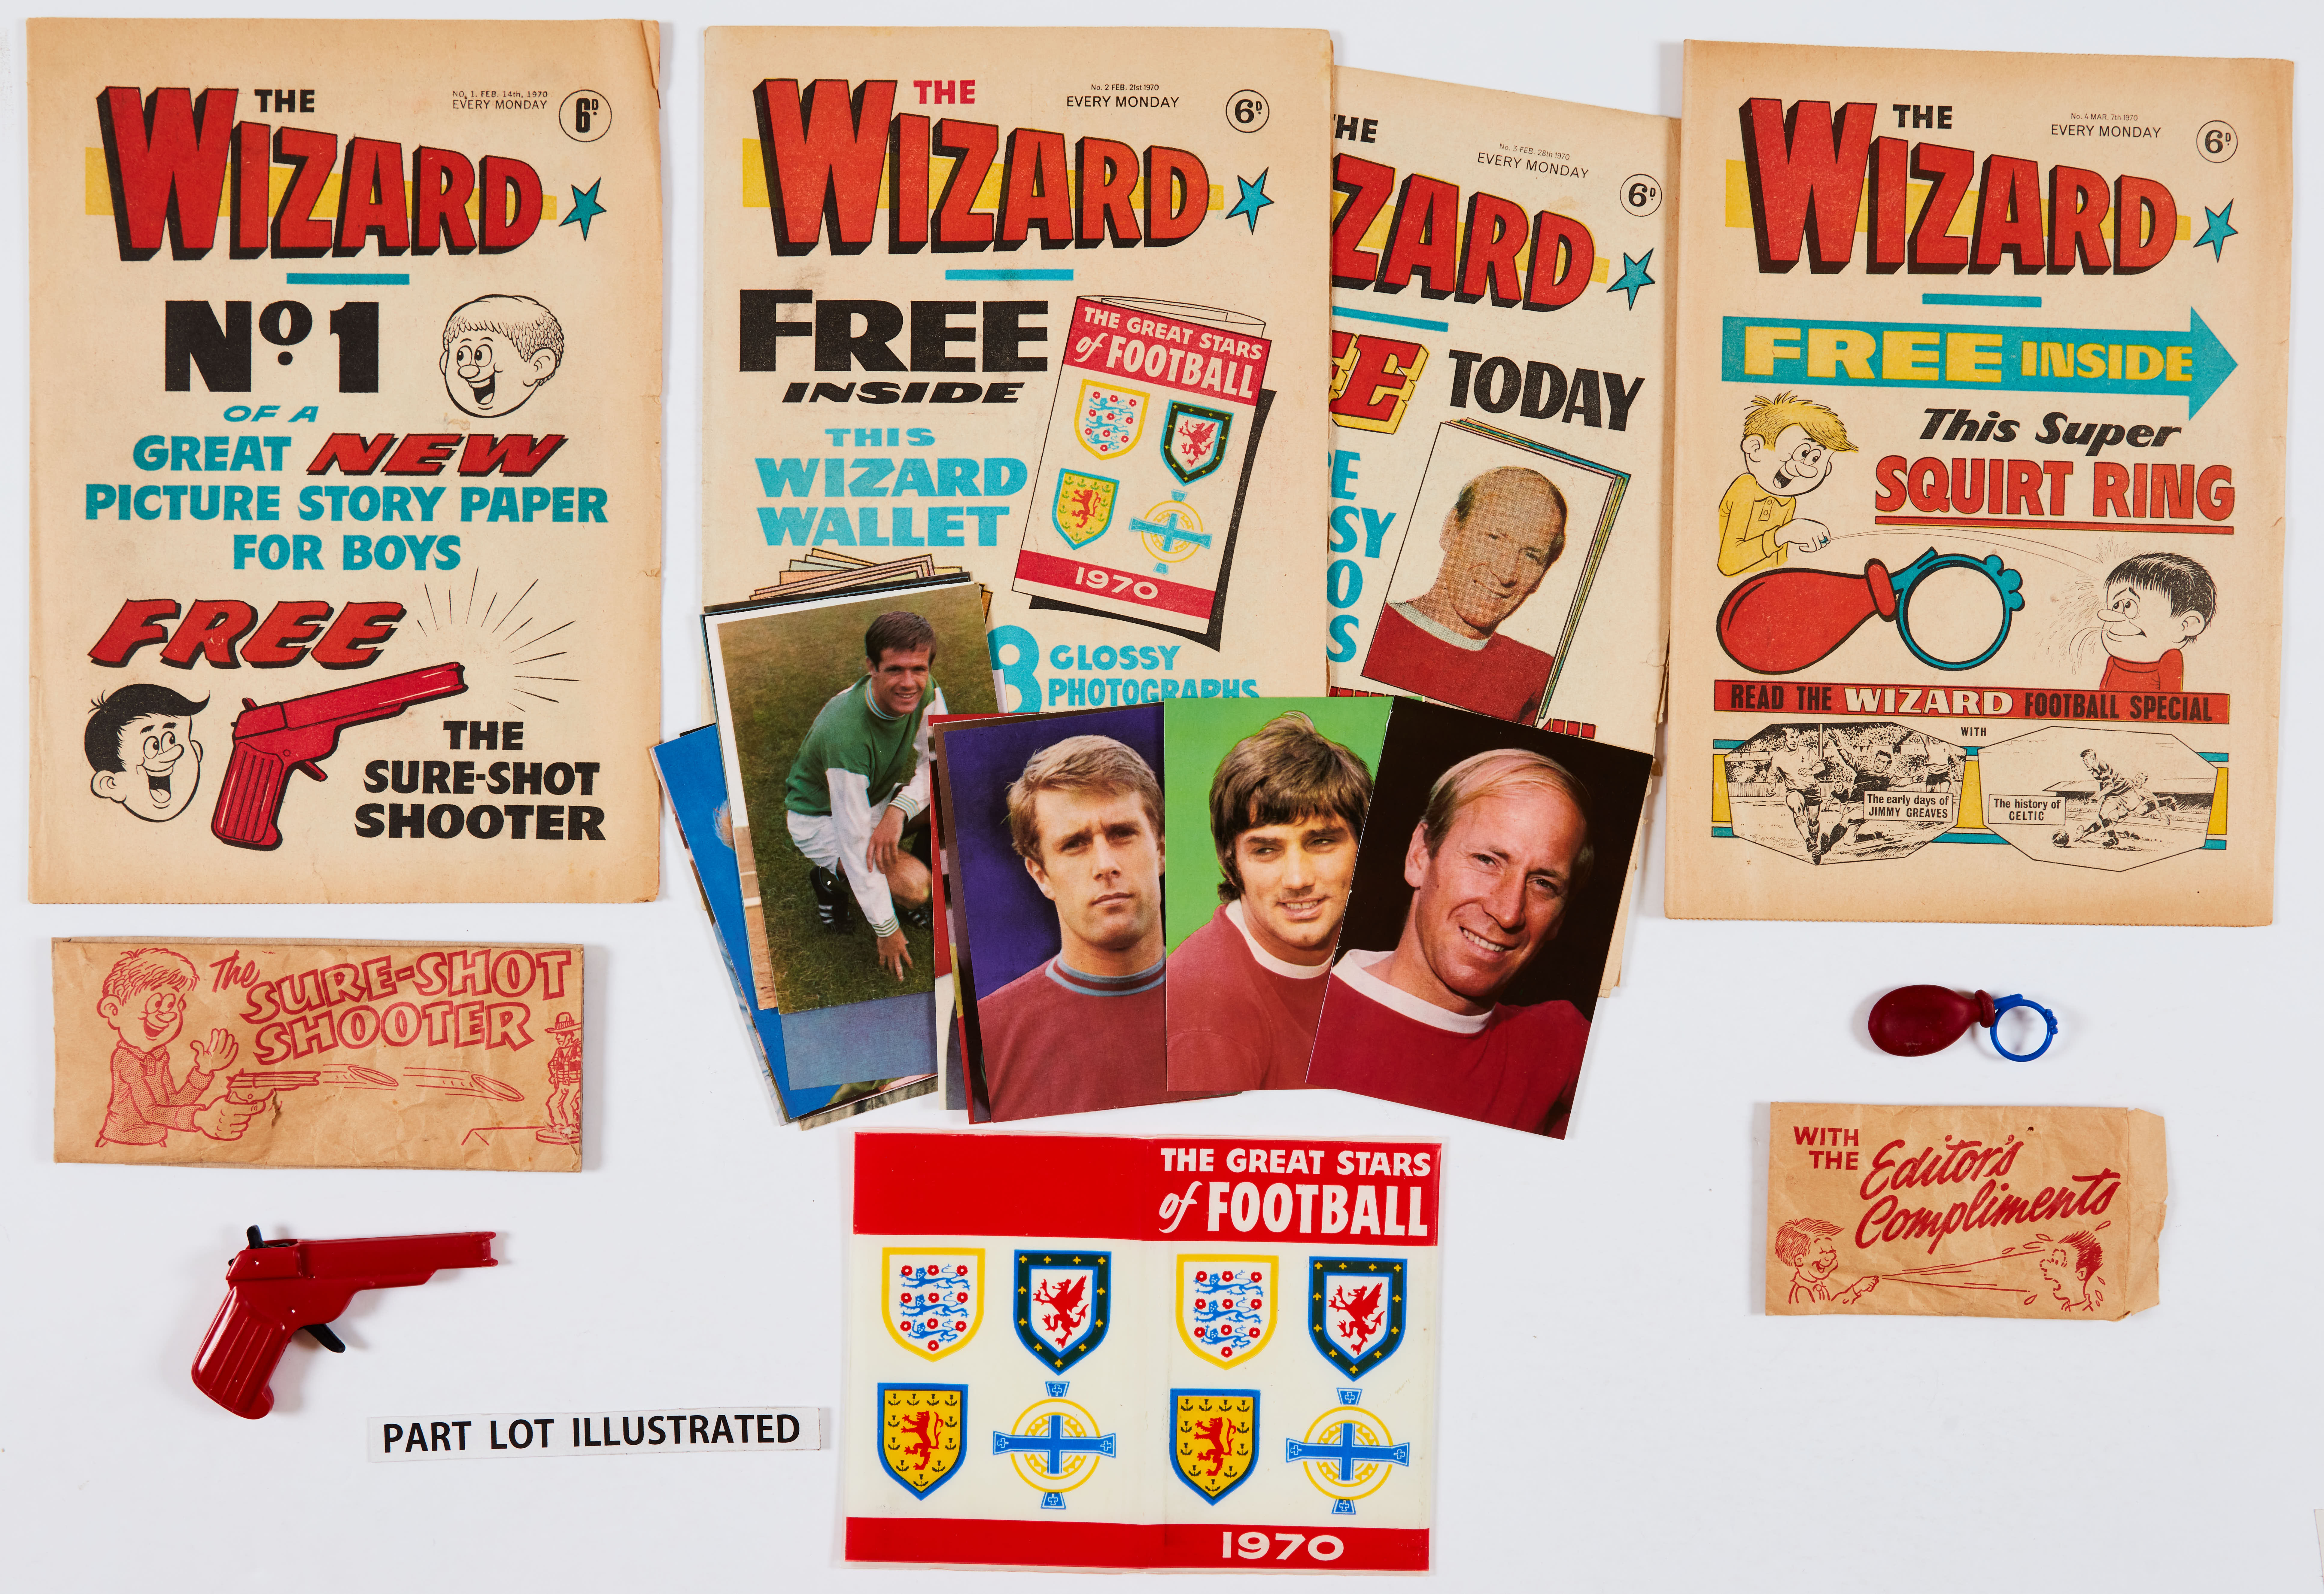 Wizard (Feb-Dec 1970) 1-46. Complete year with free gifts with No 1 Sure-Shot Shooter in illustrated